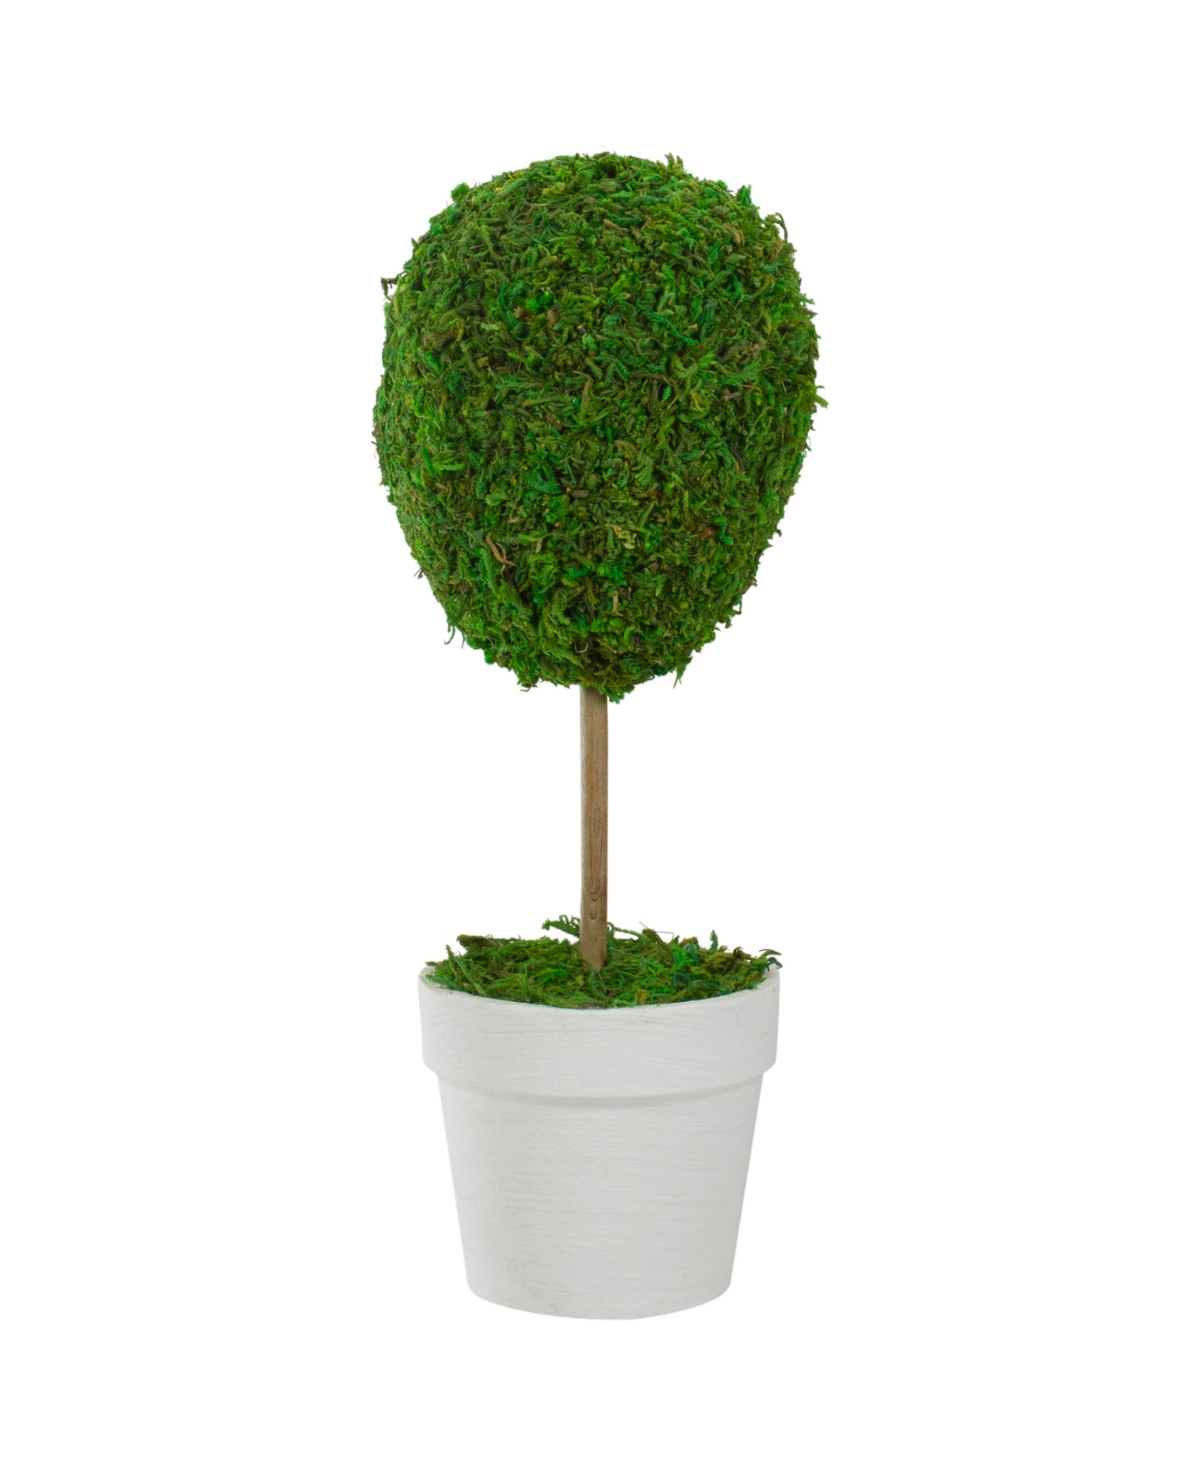 Northlight 14" Reindeer Moss Ball Potted Artificial Spring Topiary Tree In Green